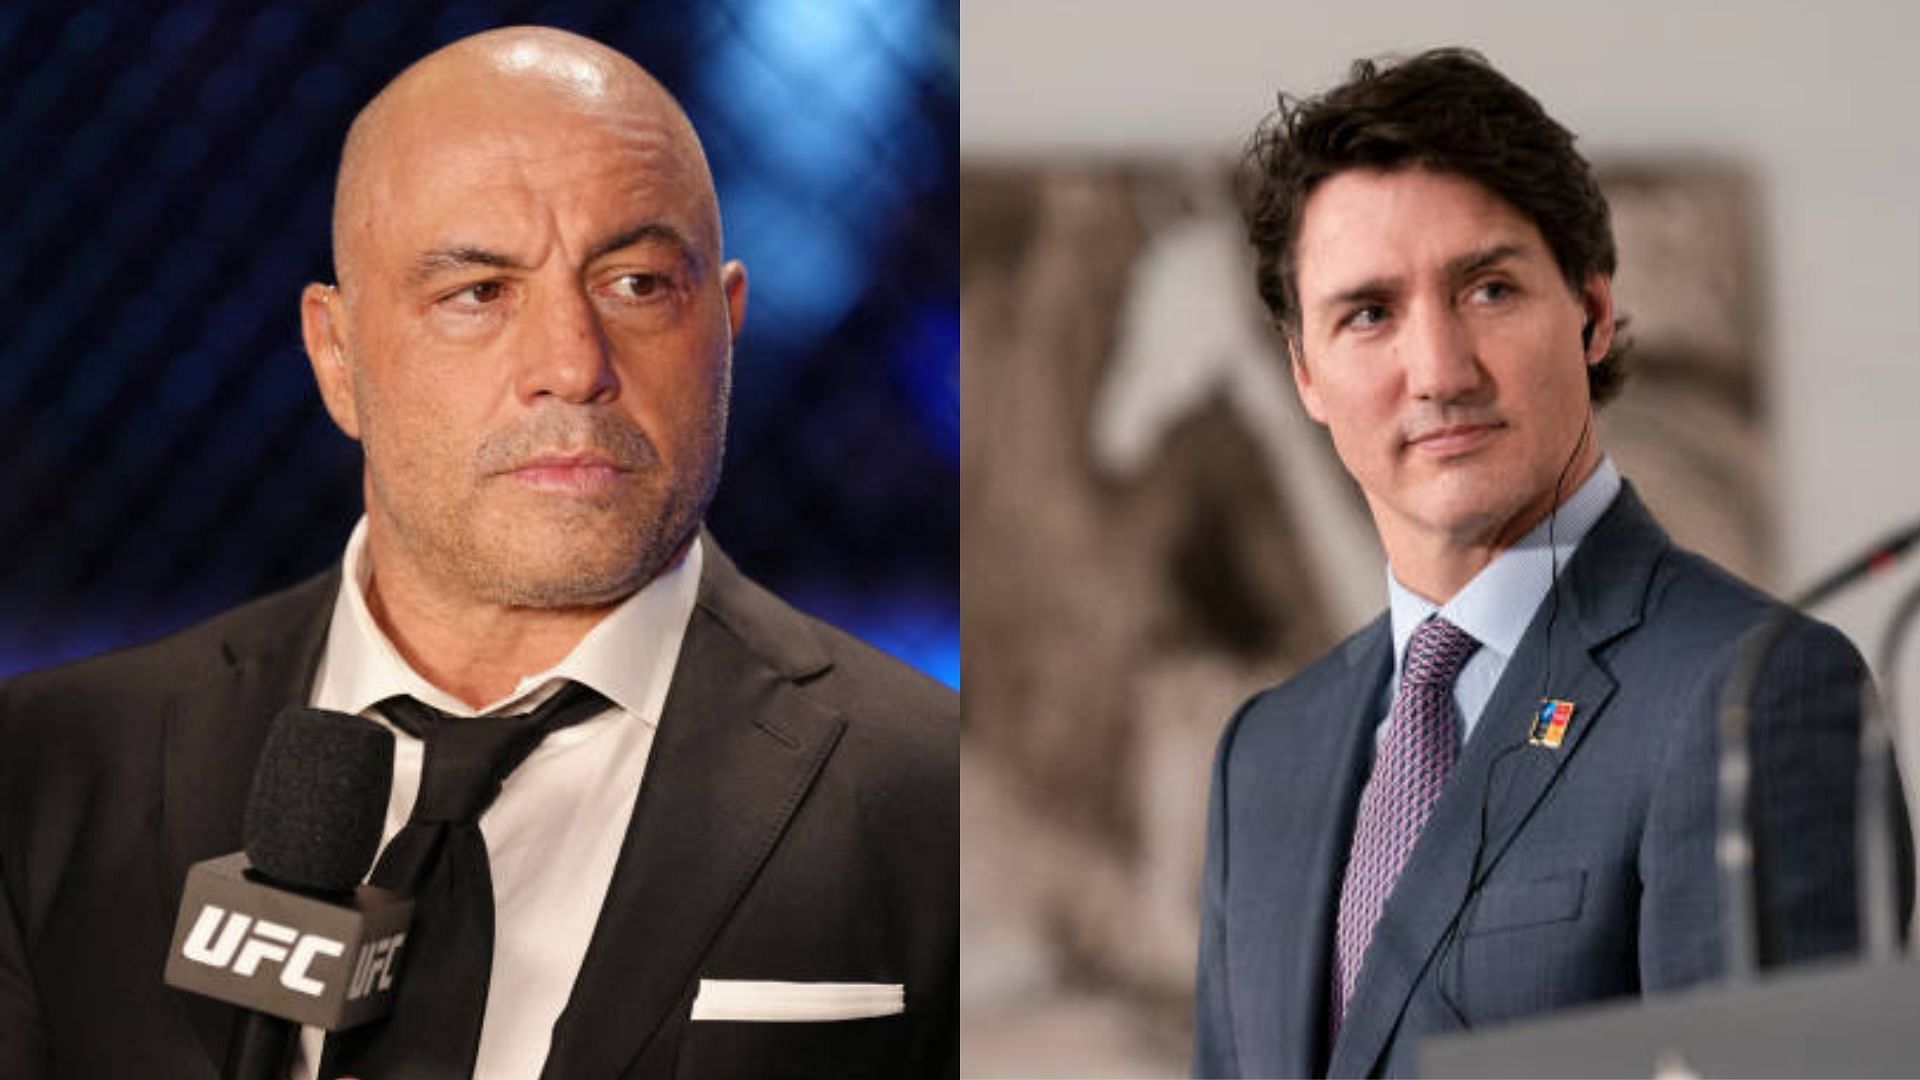 Rogan (L) has hit out at Canadian PM Justin Trudeau (R) in the past